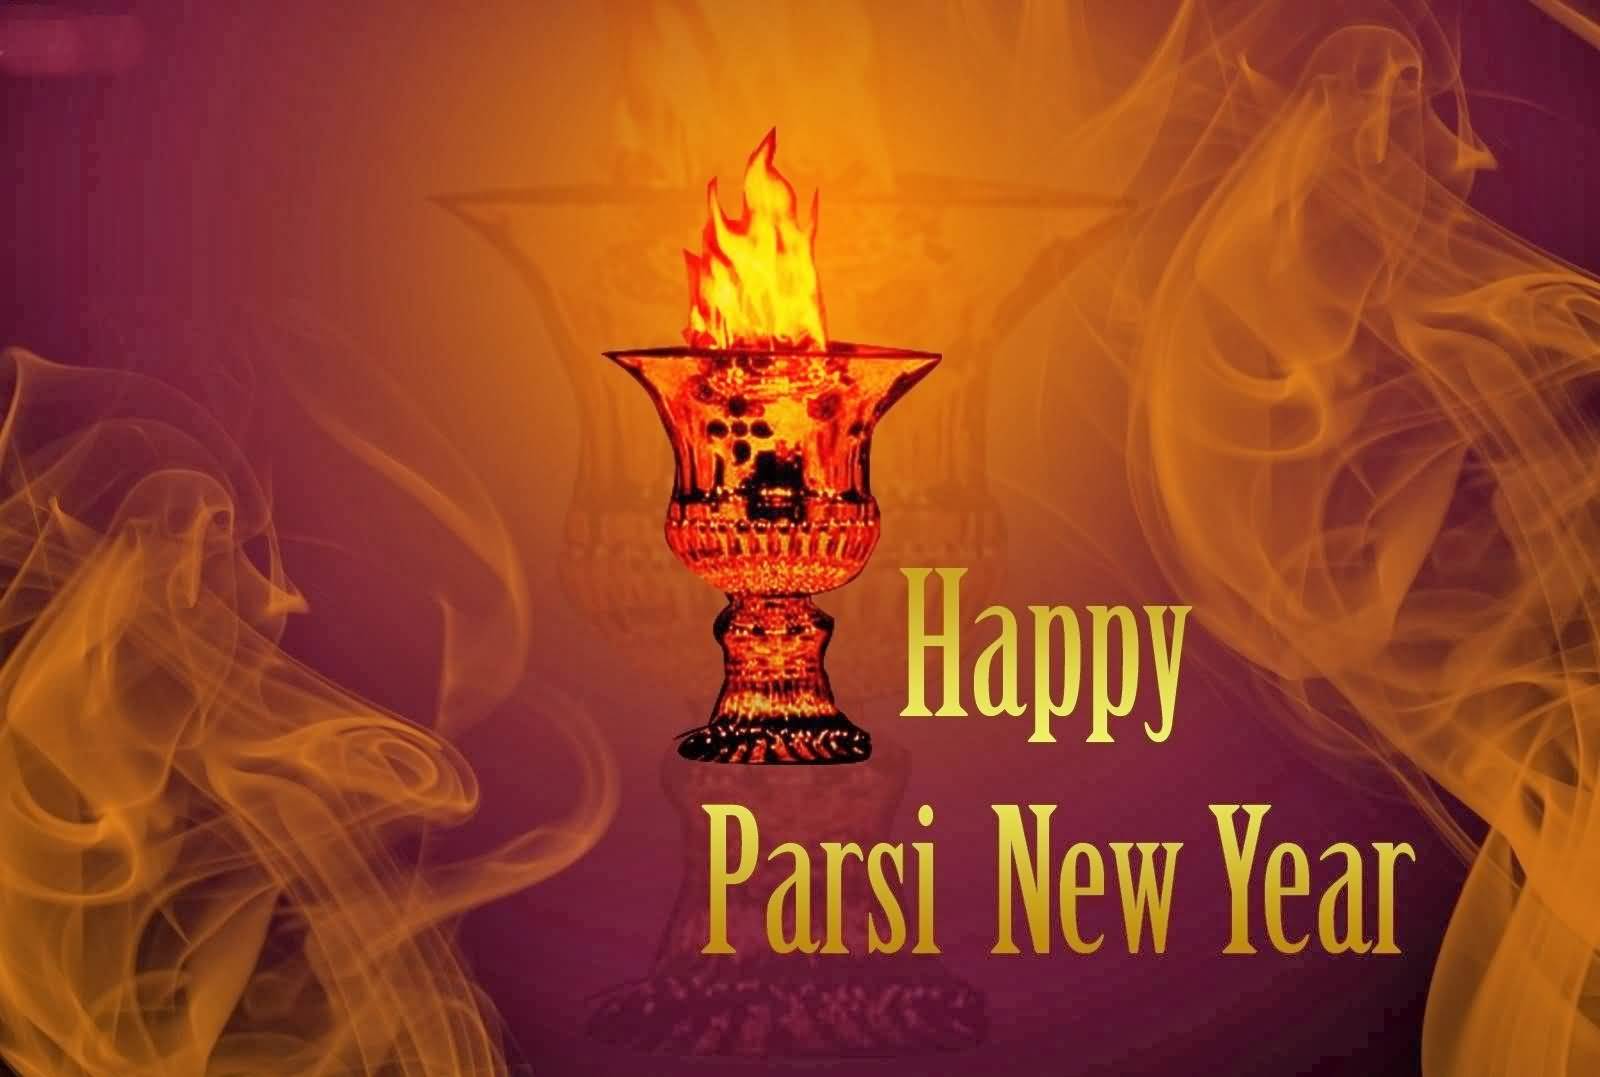 Happy Parsi New Year Picture